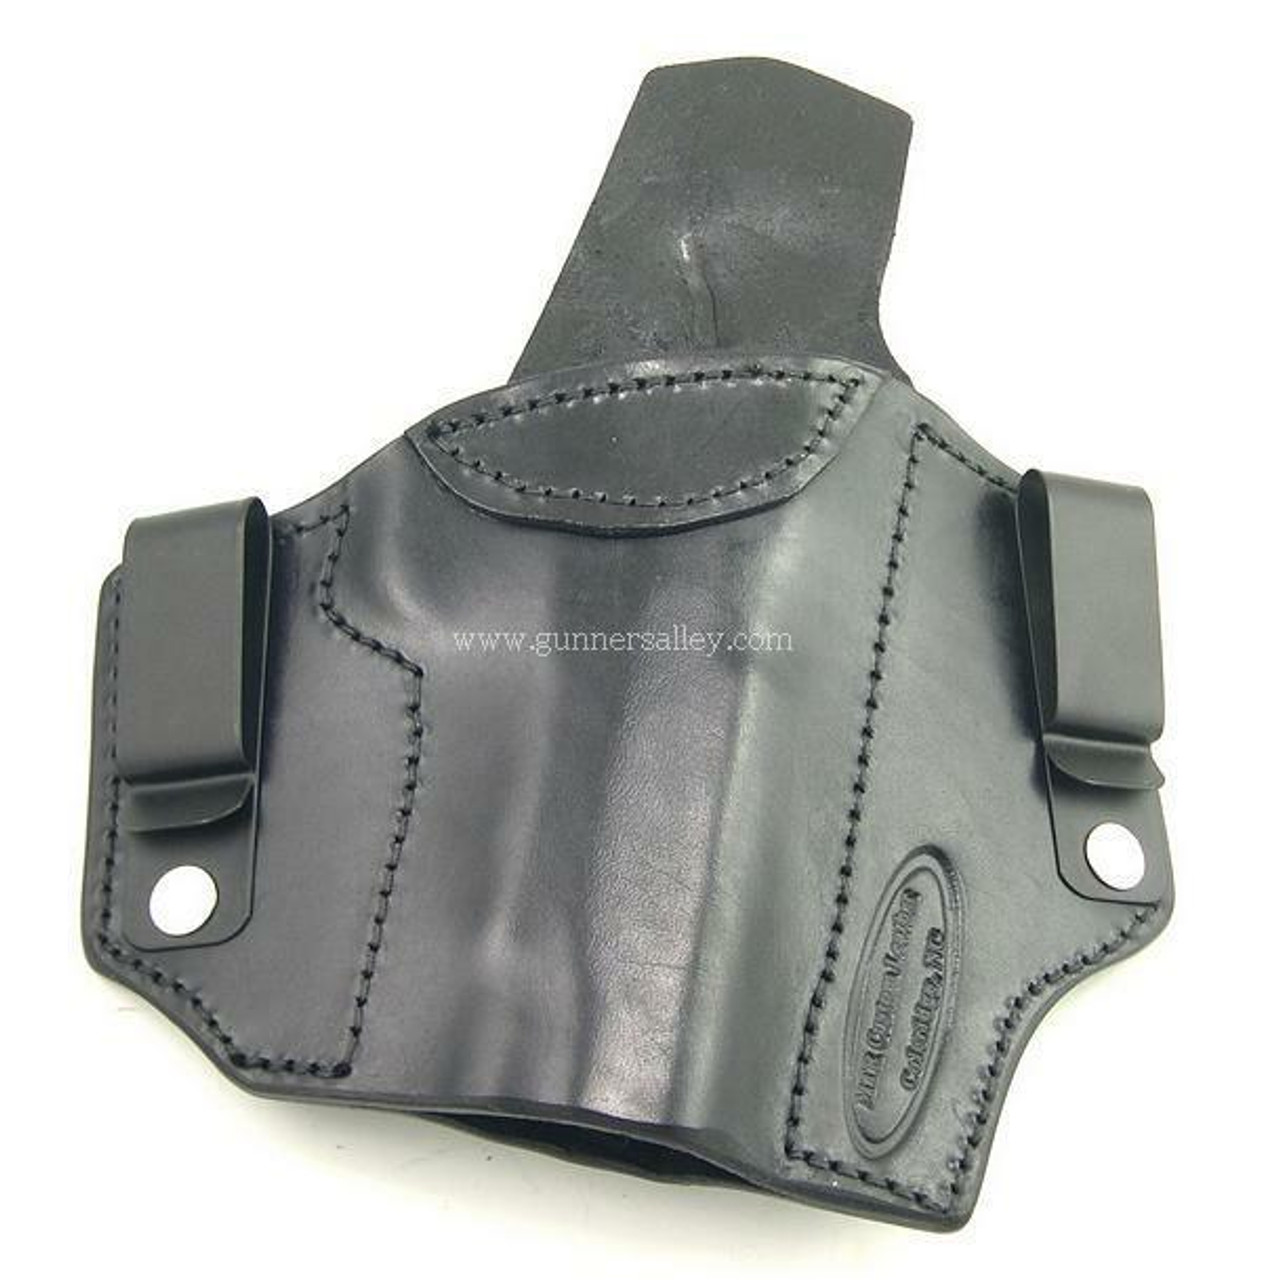 TUCKABLE INSIDE THE WAISTBAND LEATHER HOLSTER FOR RUGER P95 IWB HOLSTER. 